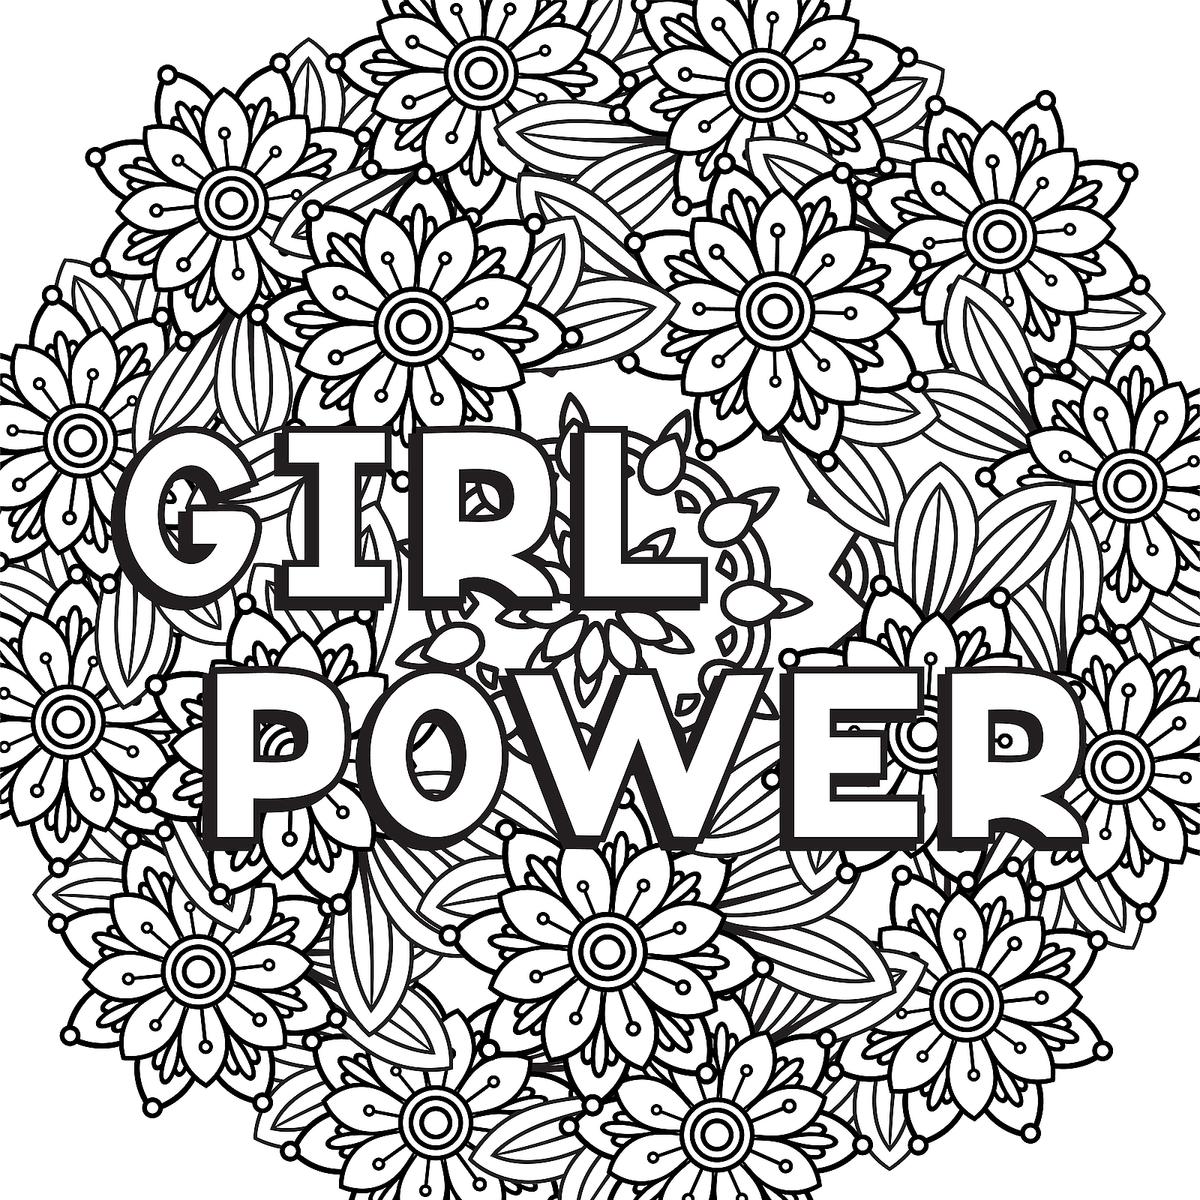 Strong Women Coloring Pages: 10 Printable Coloring Pages for ...